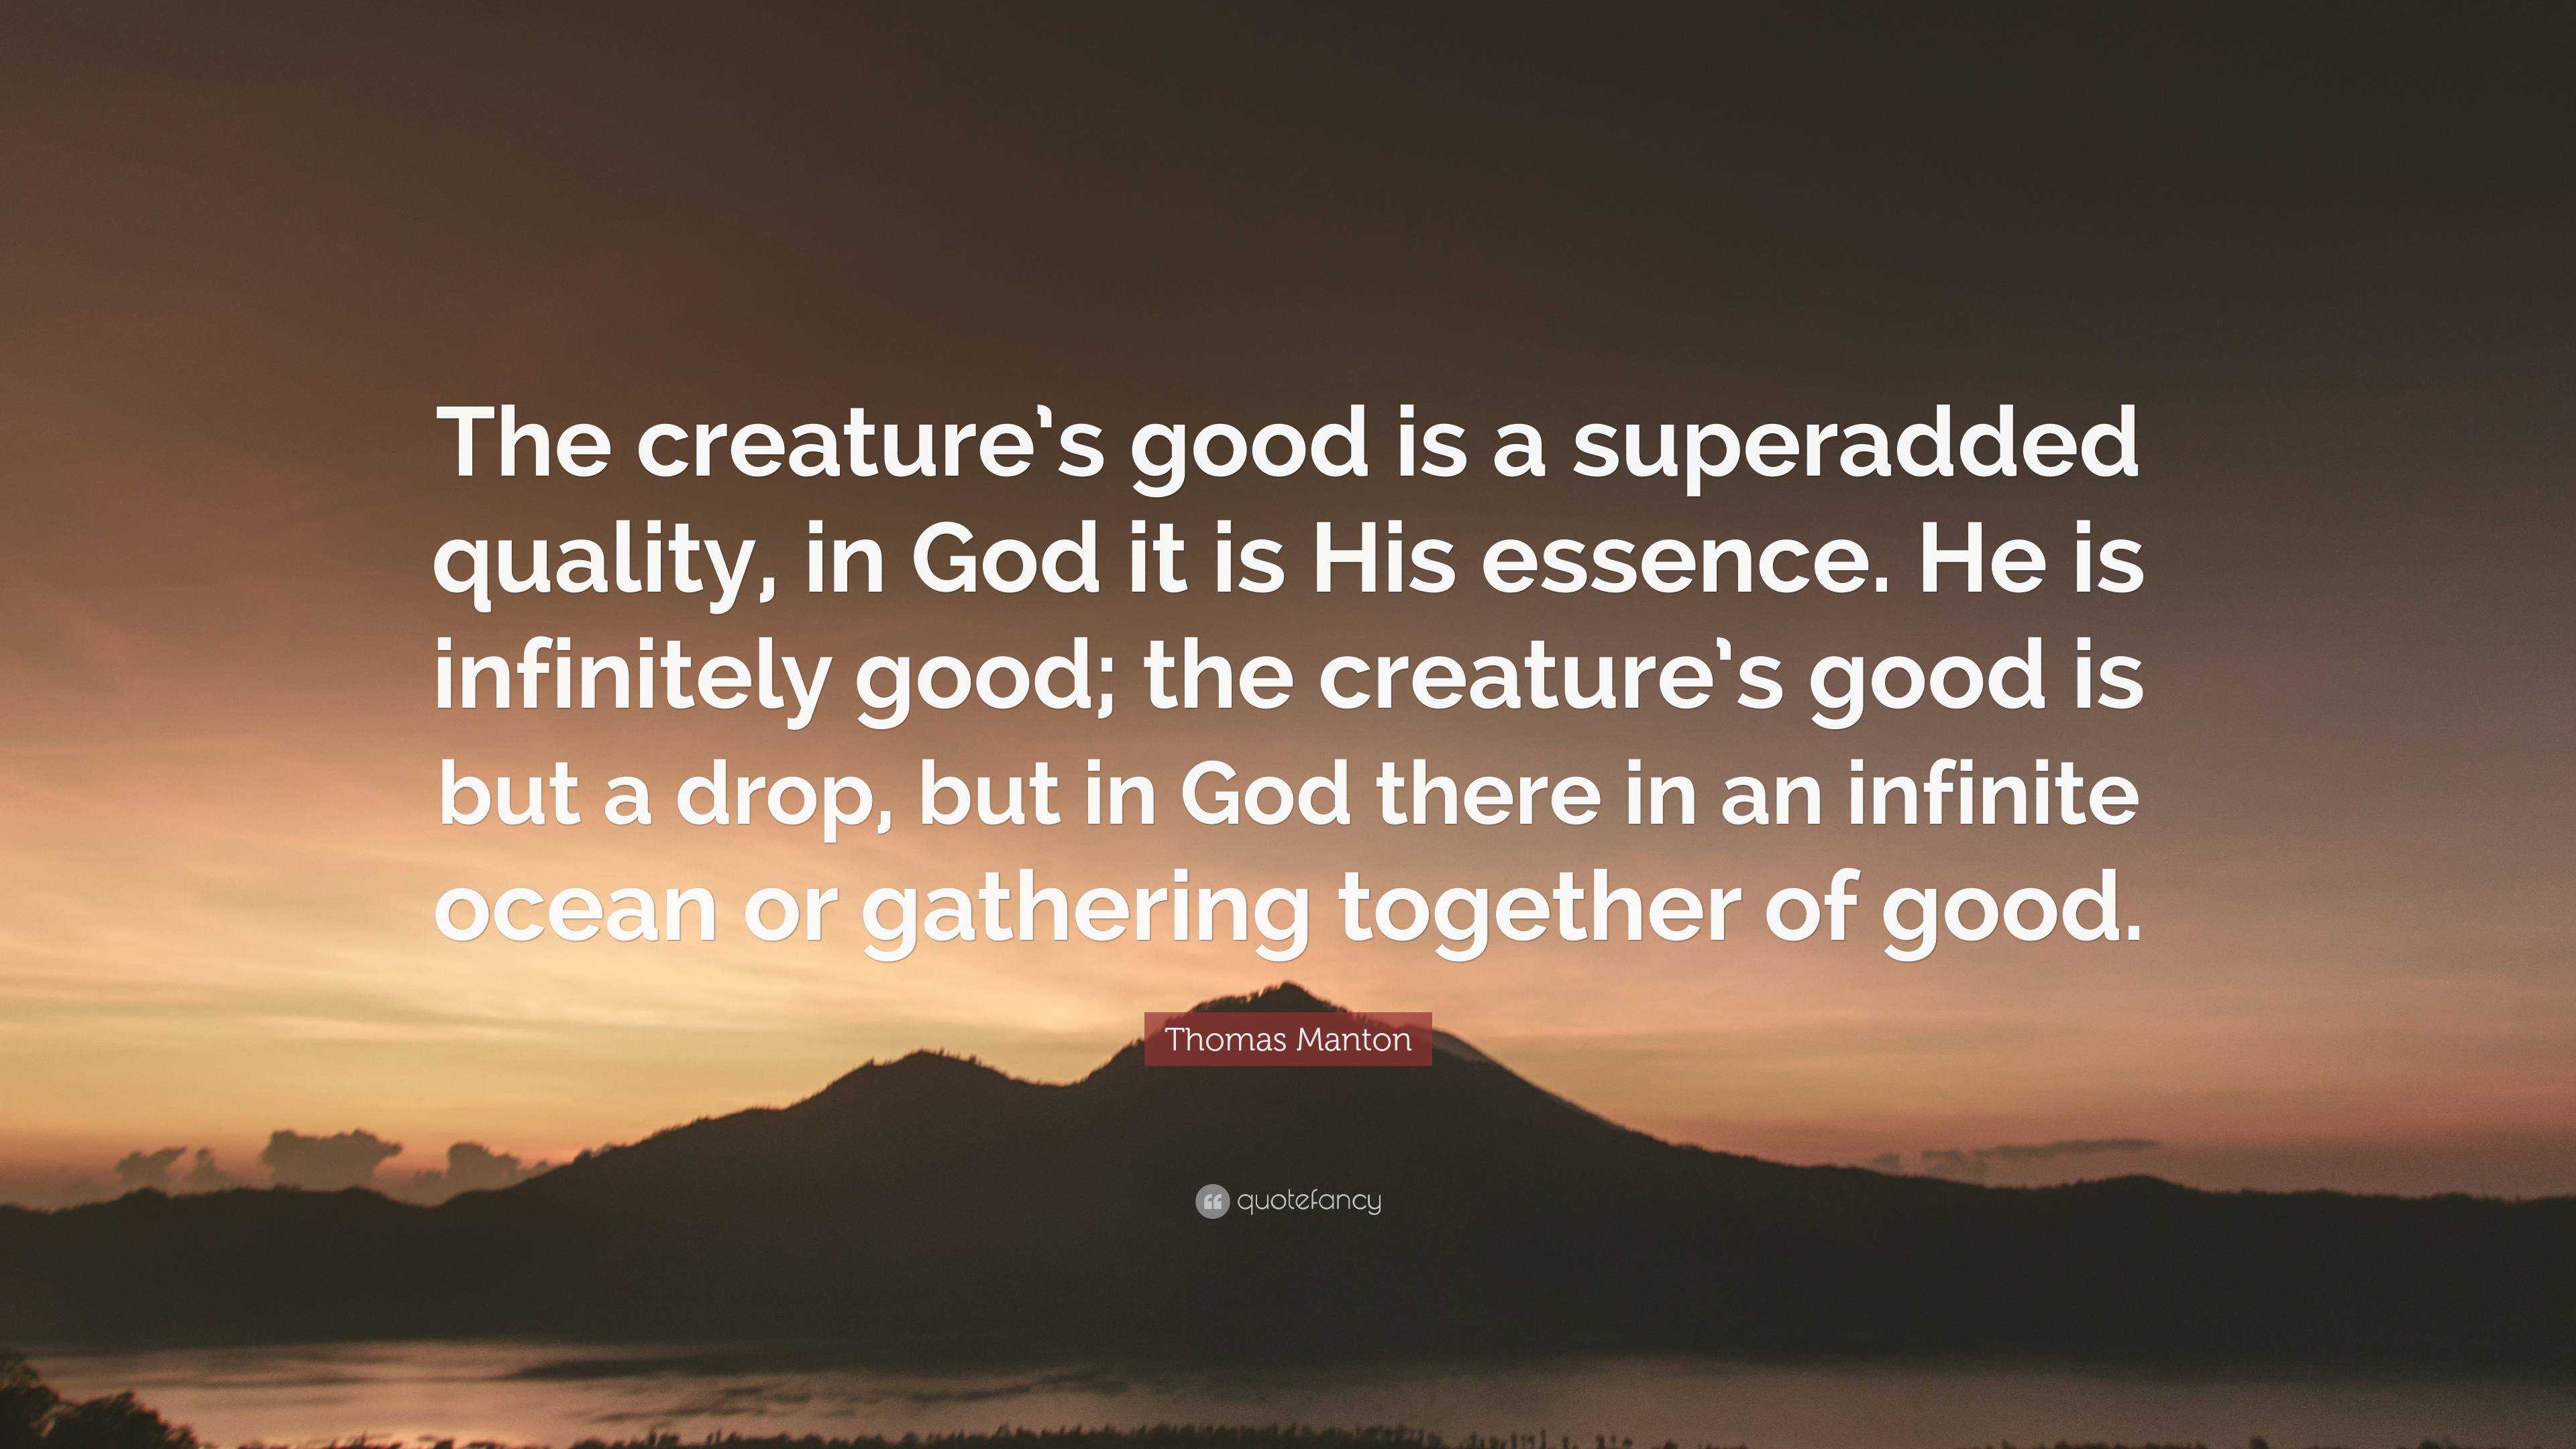 Thomas Manton Quote “The creature’s good is a superadded quality, in